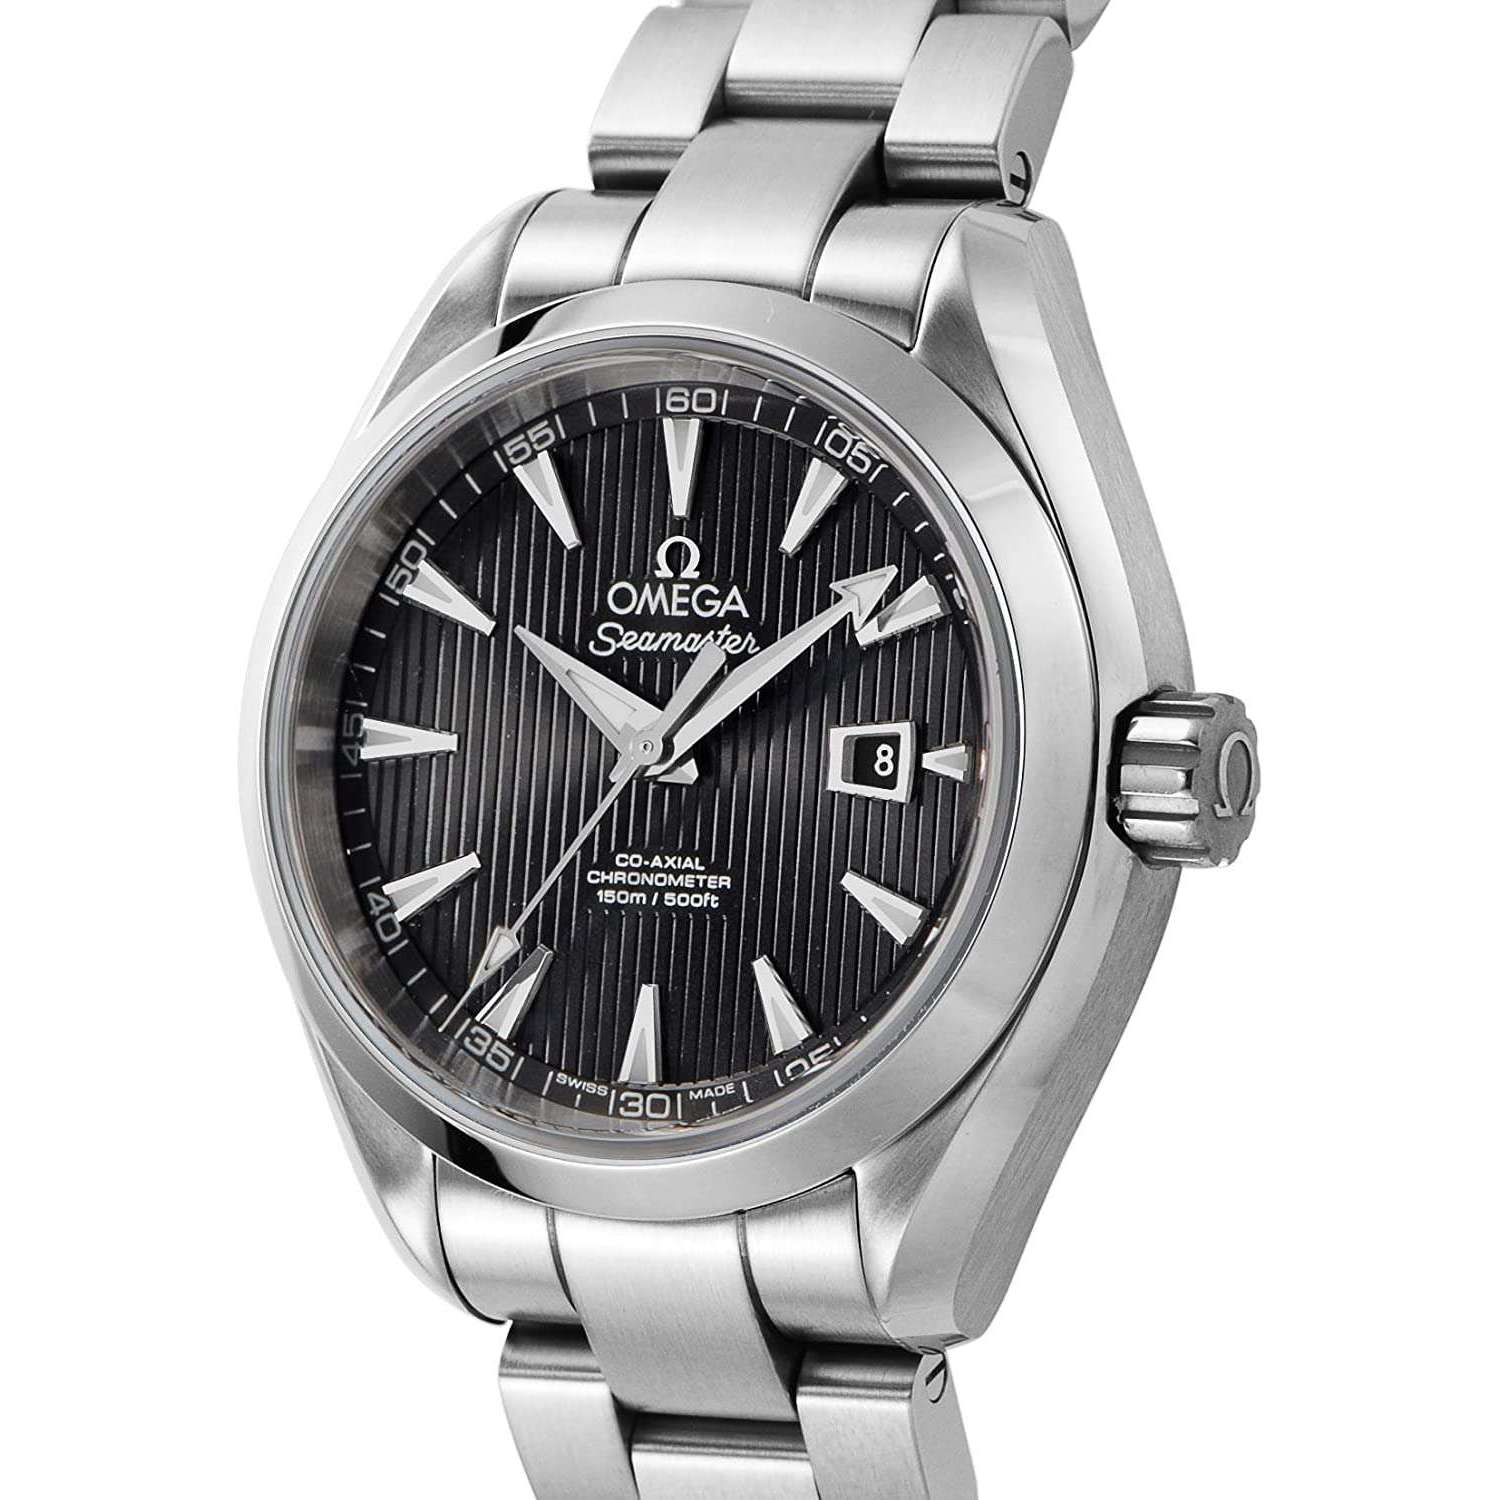 ROOK JAPAN:OMEGA SEAMASTER CO-AXIAL CHRONOMETER 34 MM MEN WATCH 231.10.34.20.01.001,Luxury Watch,Omega